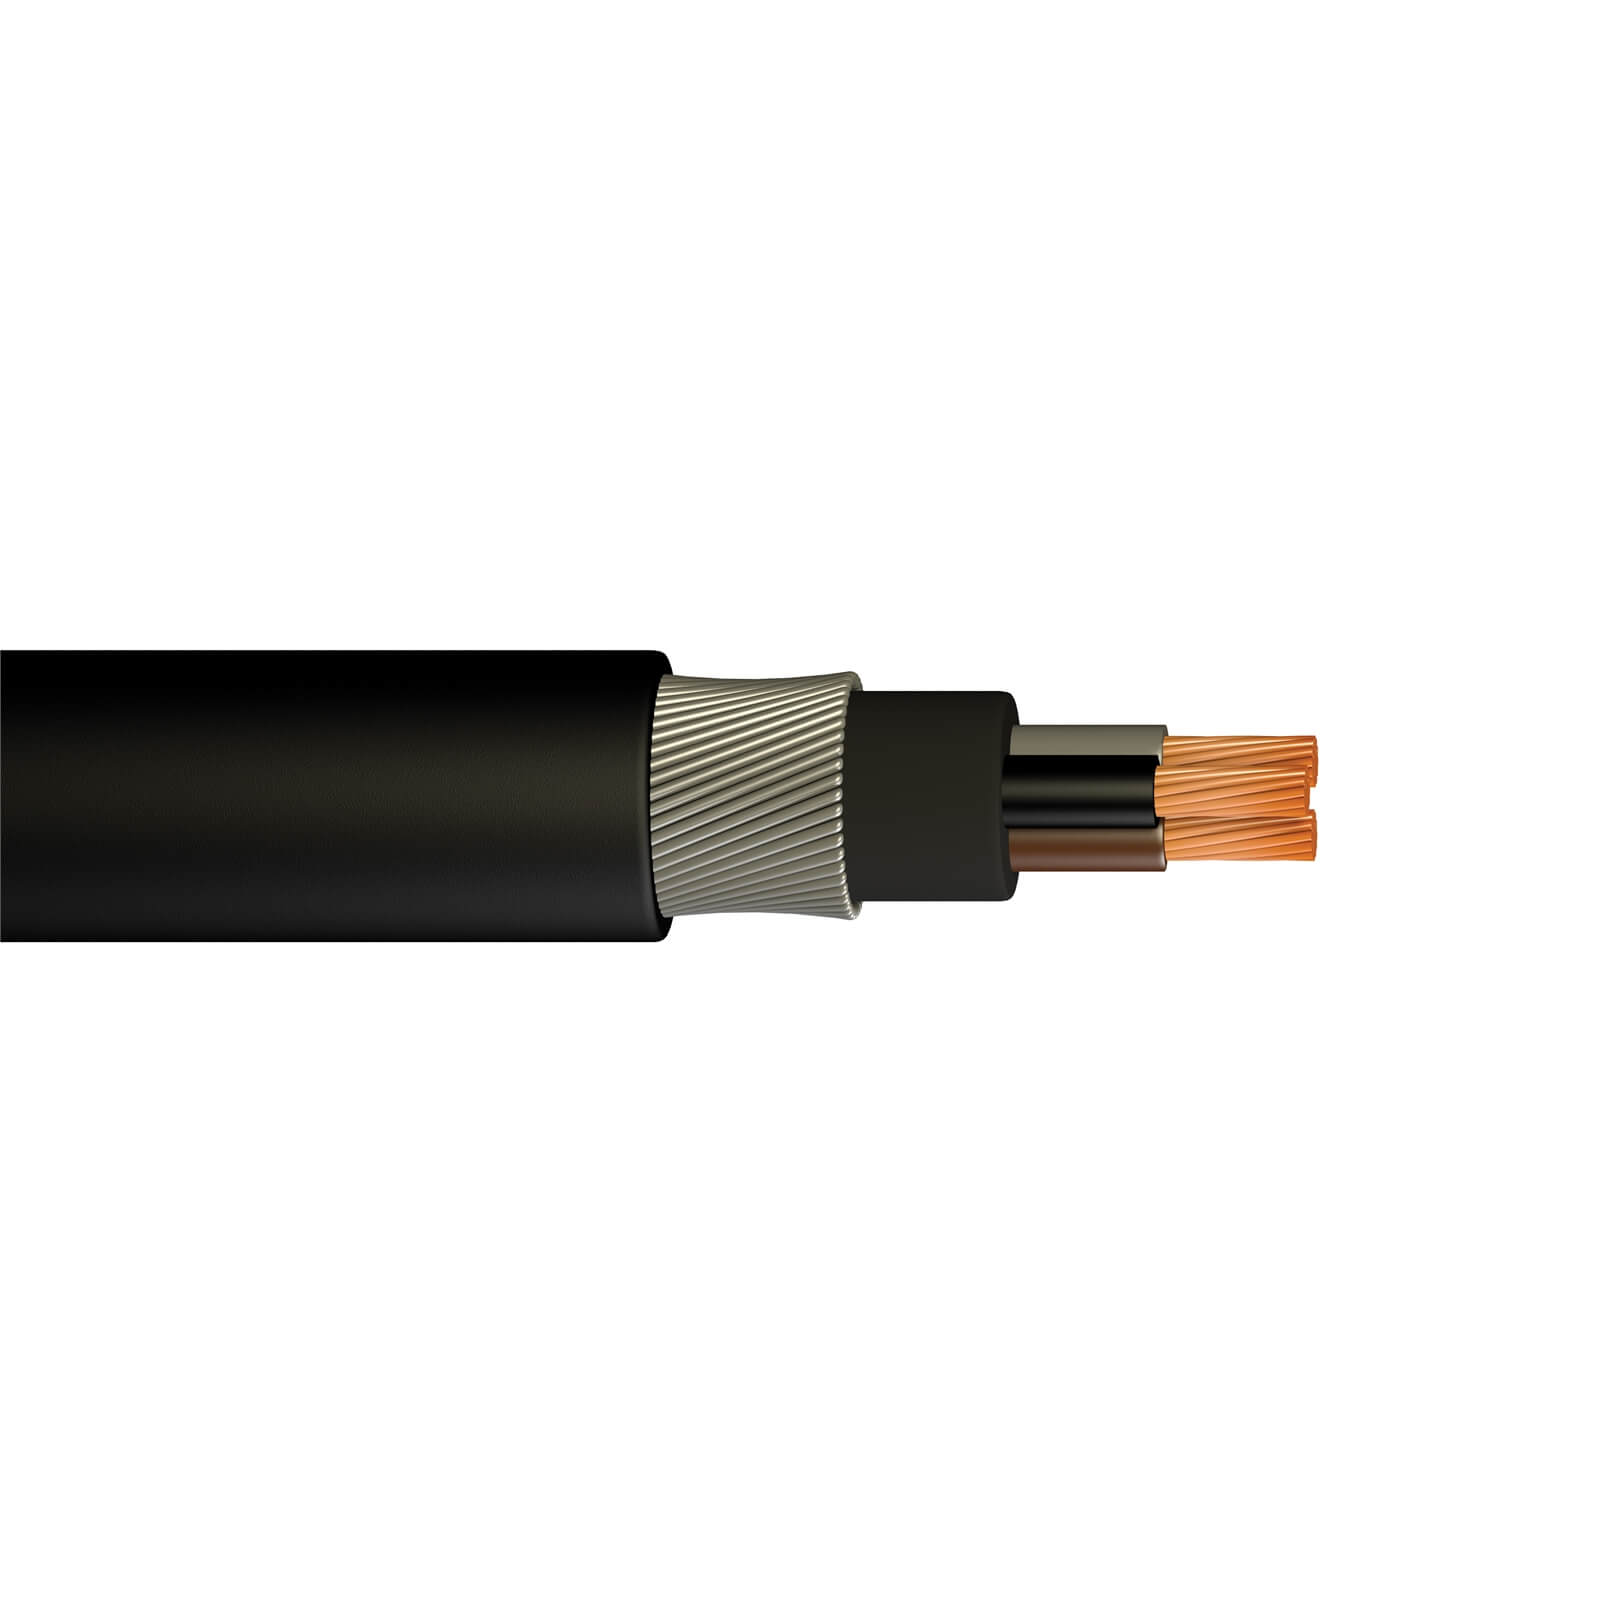 Pitacs 2.5mm 3 Core Steel Armoured Cable 25m Black 6943X